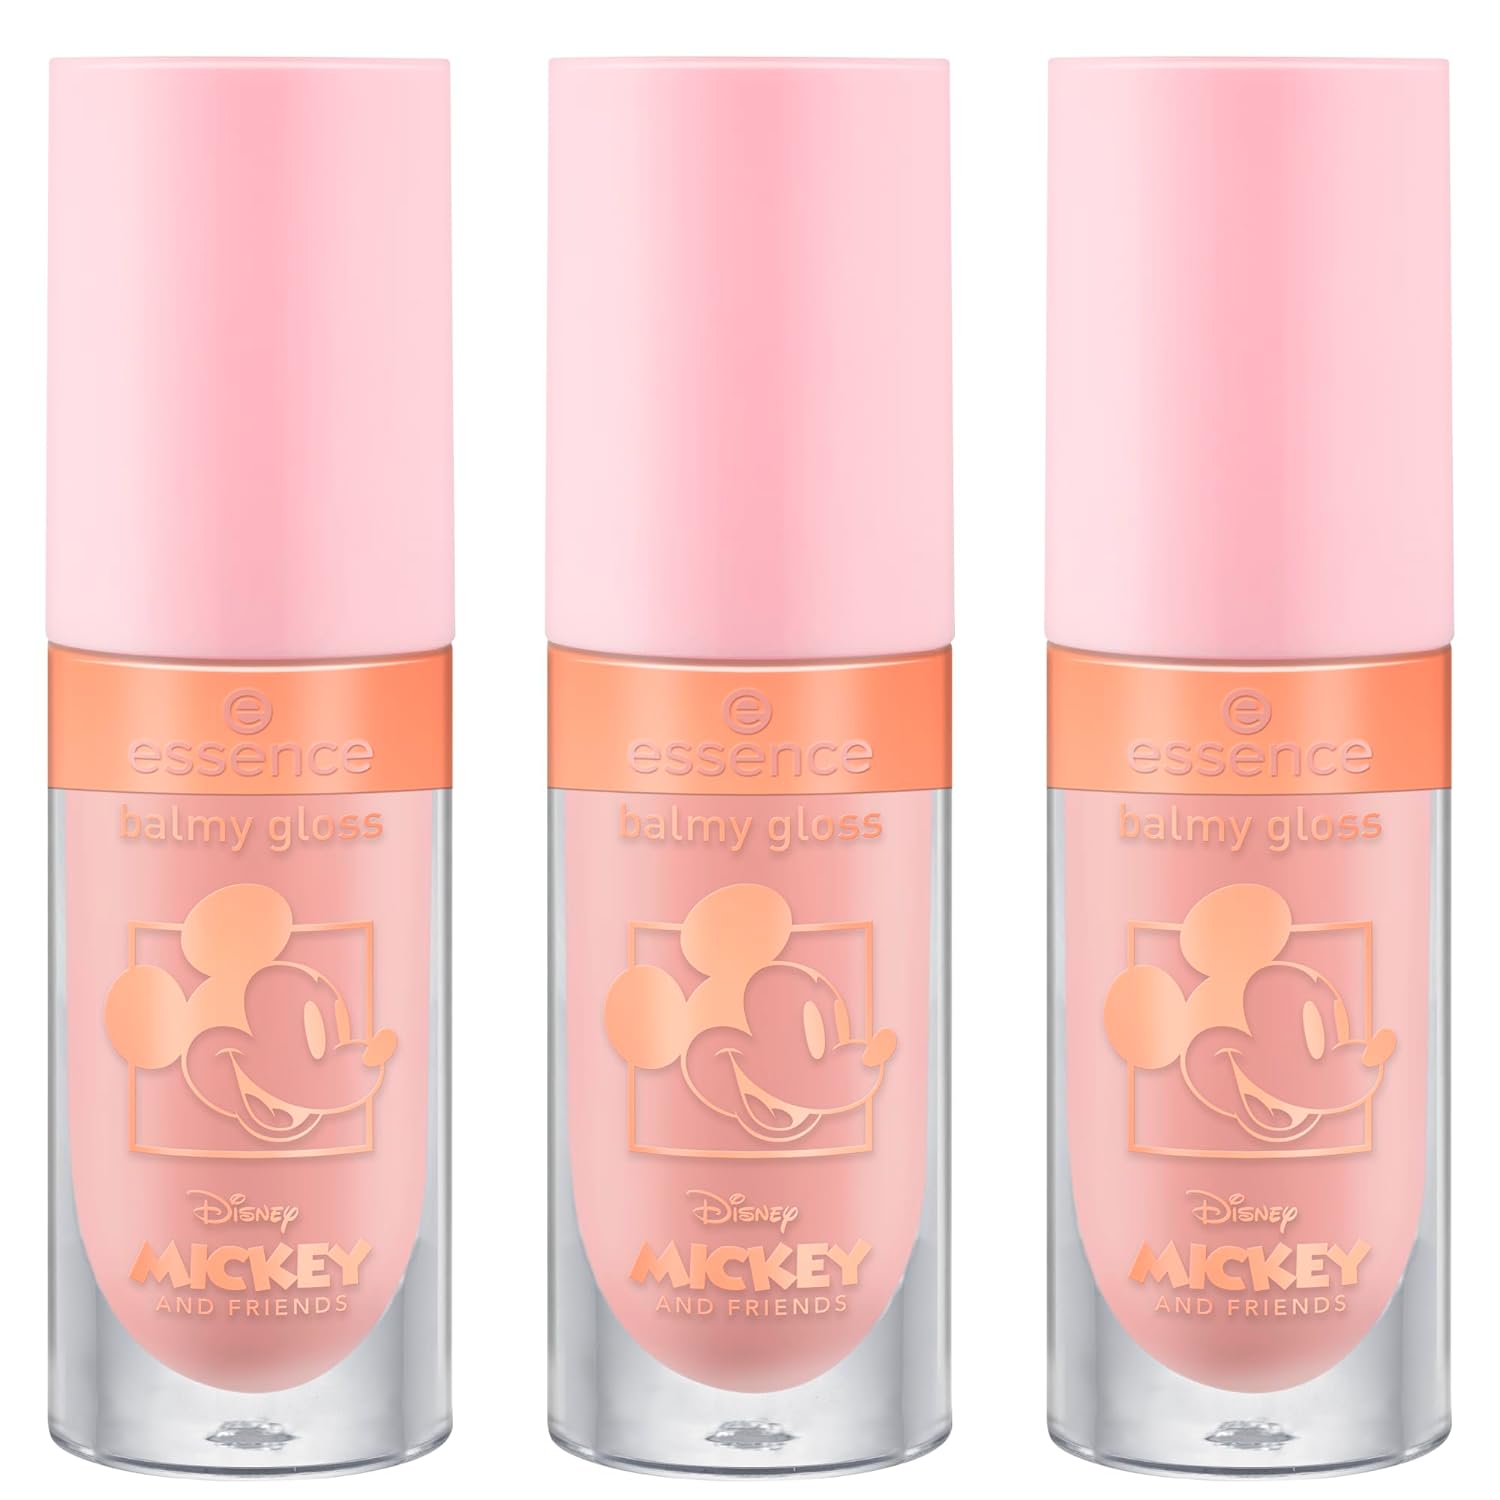 essence Disney Mickey and Friends balmy gloss, lip balm, no. 01, orange, vegan, no parabens, no microplastic particles, nanoparticles free, pack of 3 (3 x 4.5 ml)